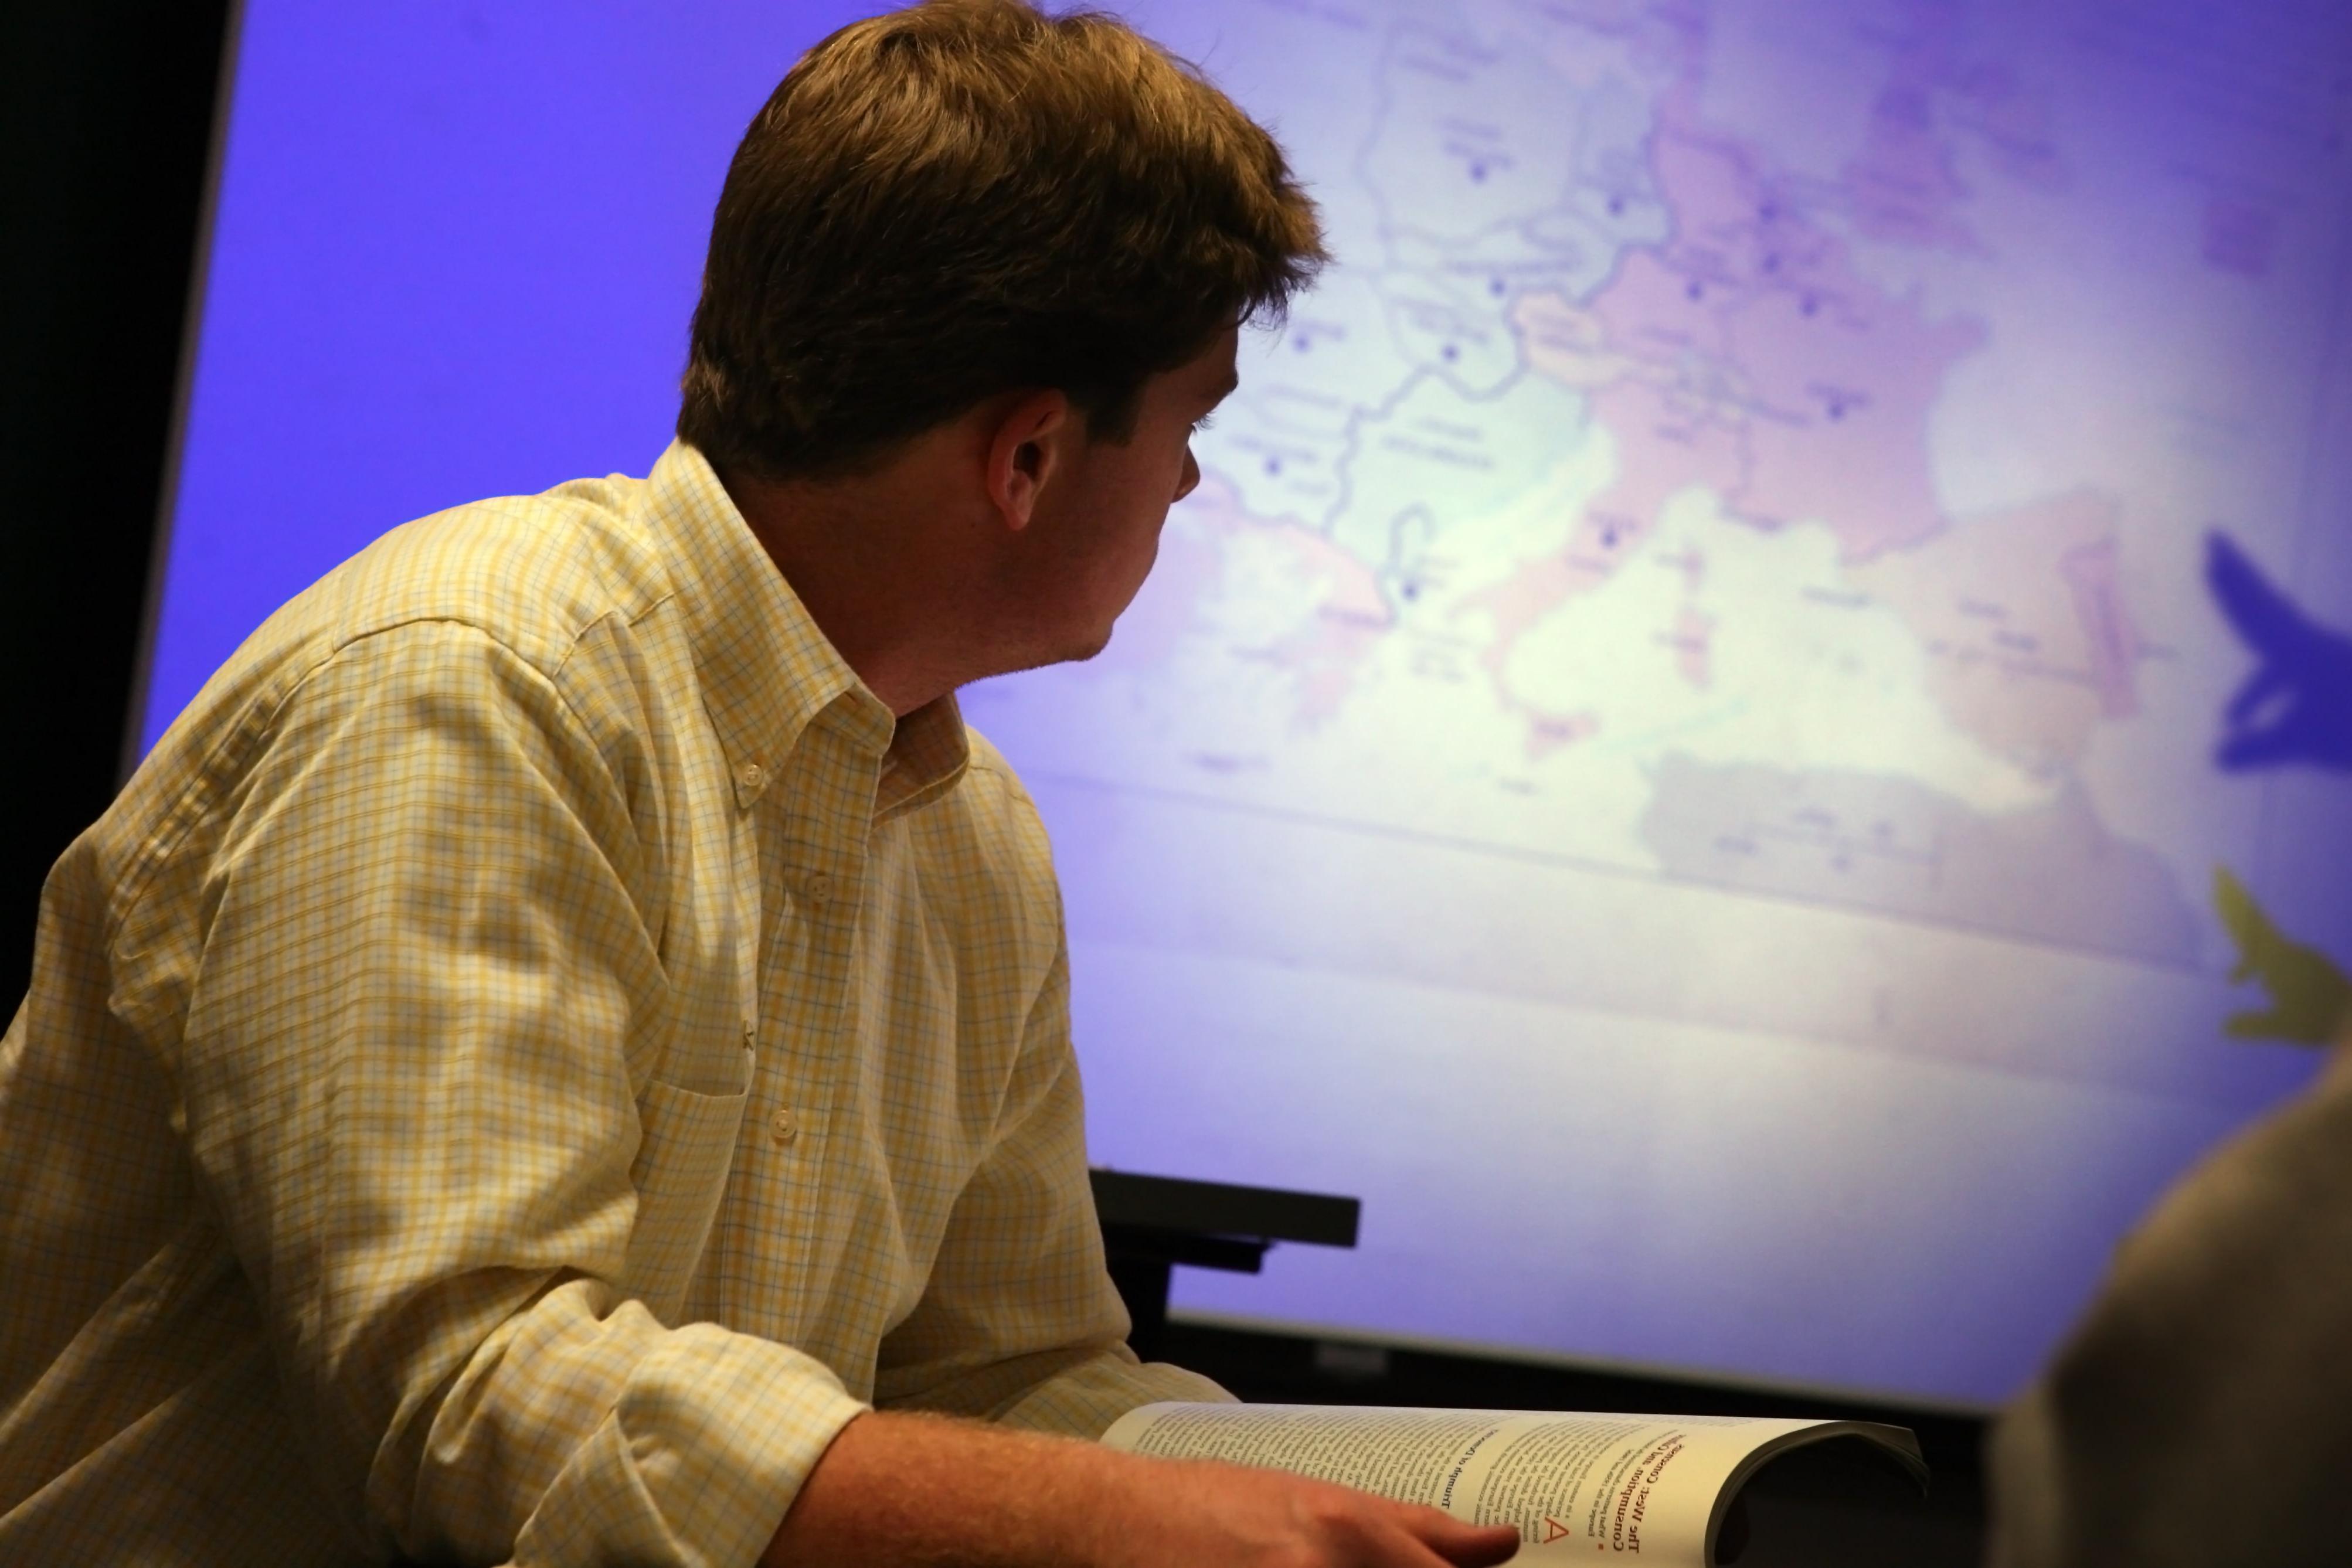 A student studies a map projected on a large screen in a classroom.